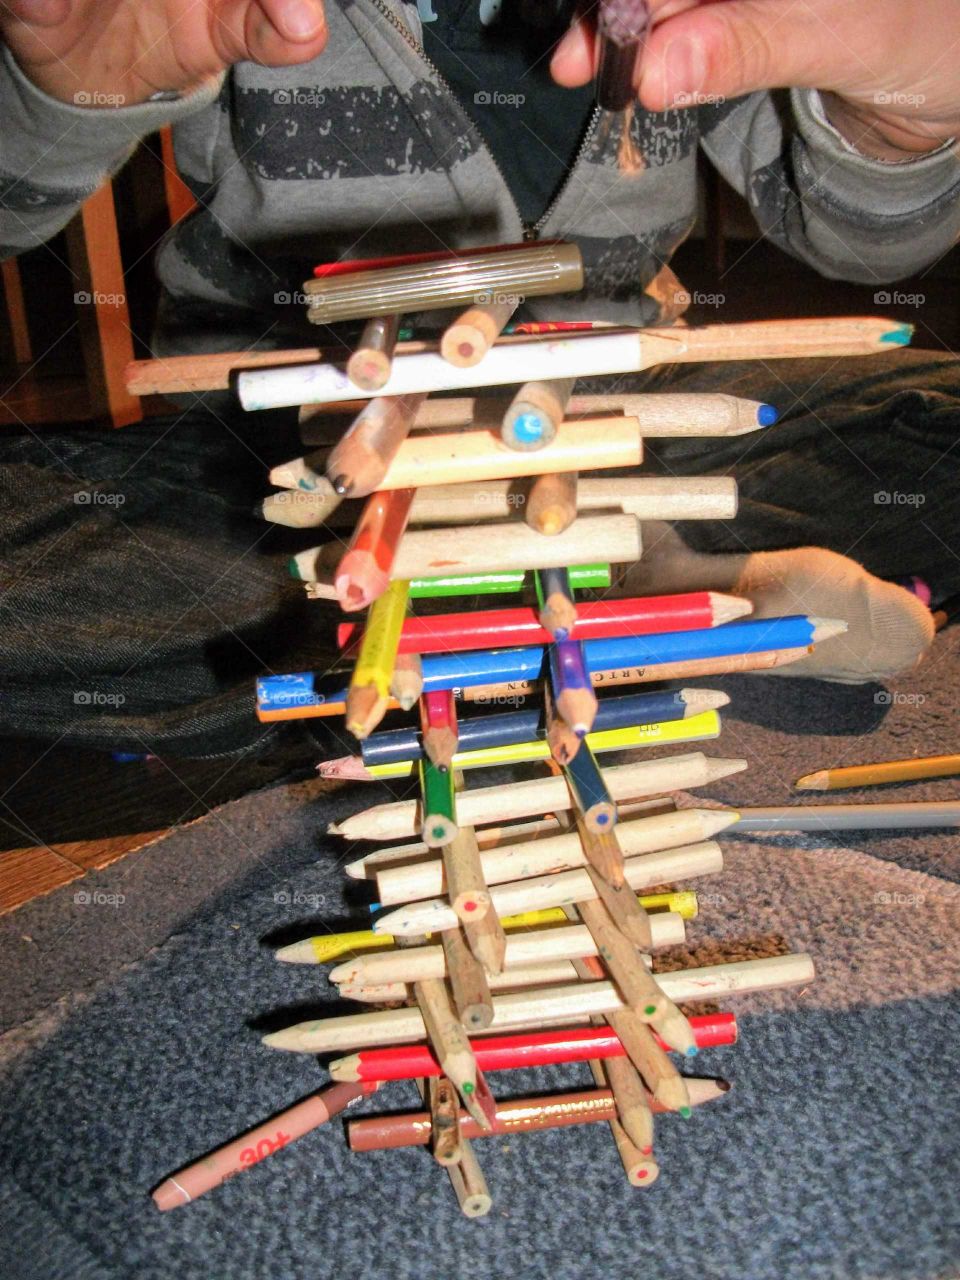 Pencil games.. Great hobby for children (and adults)